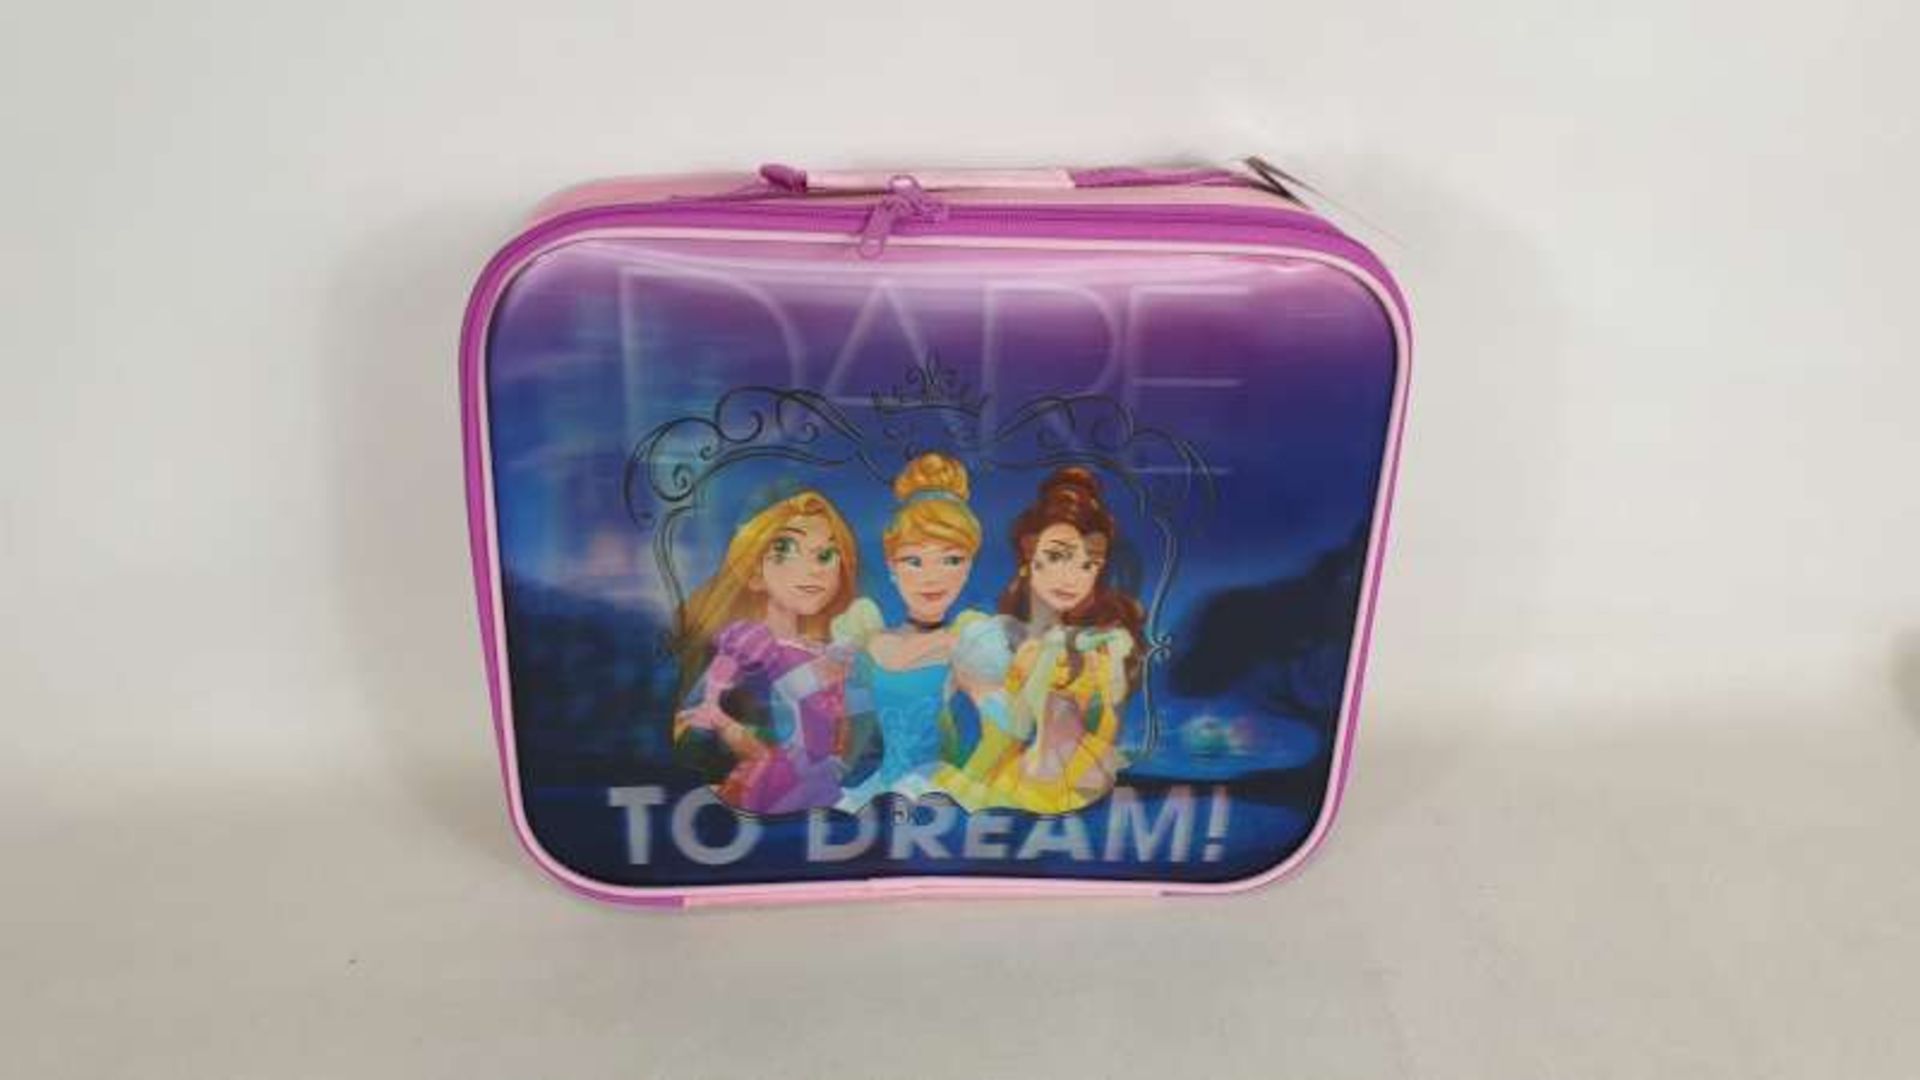 16 X BRAND NEW BOXED DISNEY PRINCESS LENTICULAR SUITCASES IN 2 BOXES